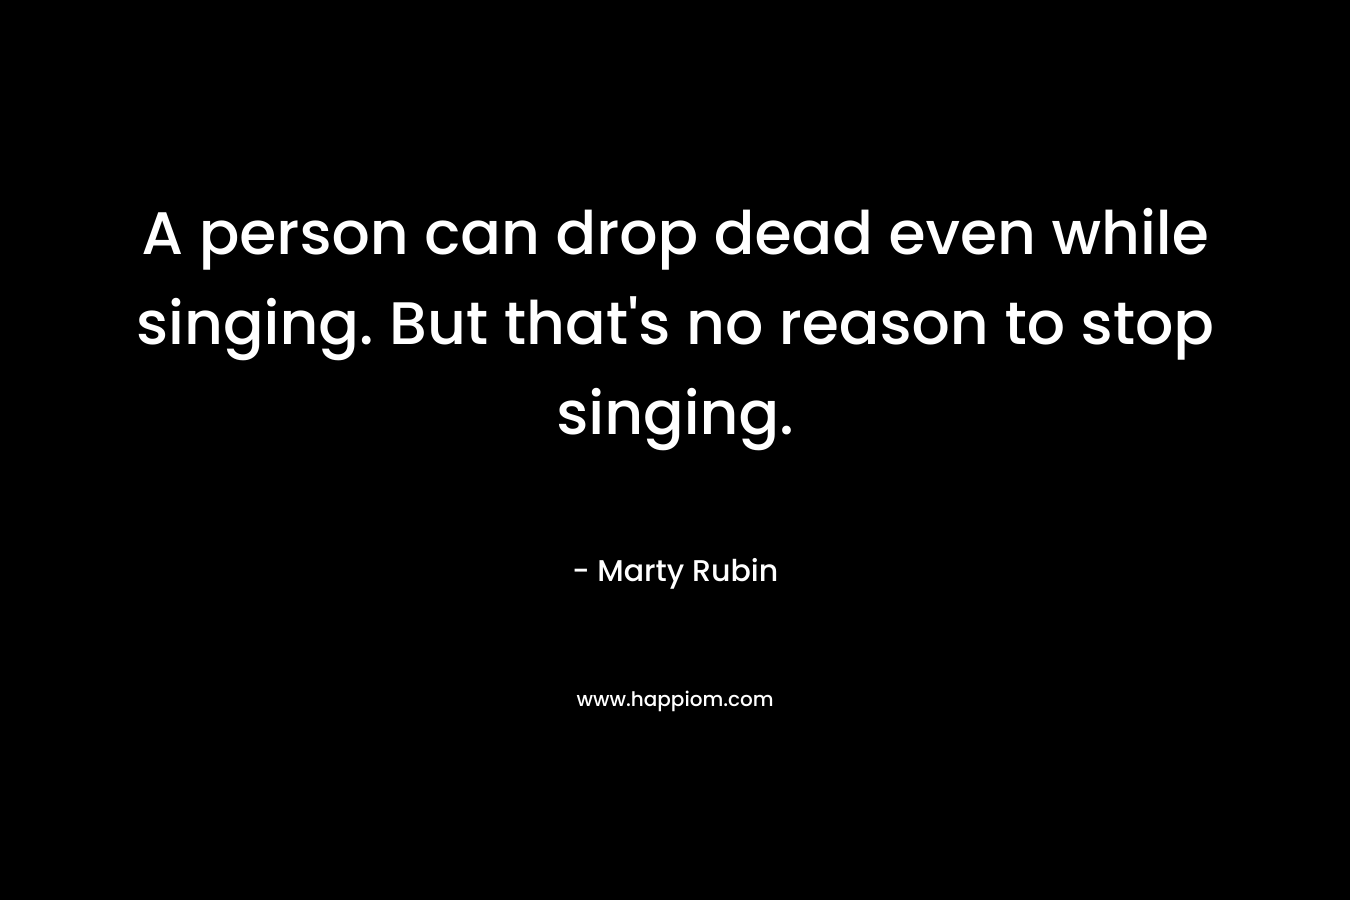 A person can drop dead even while singing. But that's no reason to stop singing.